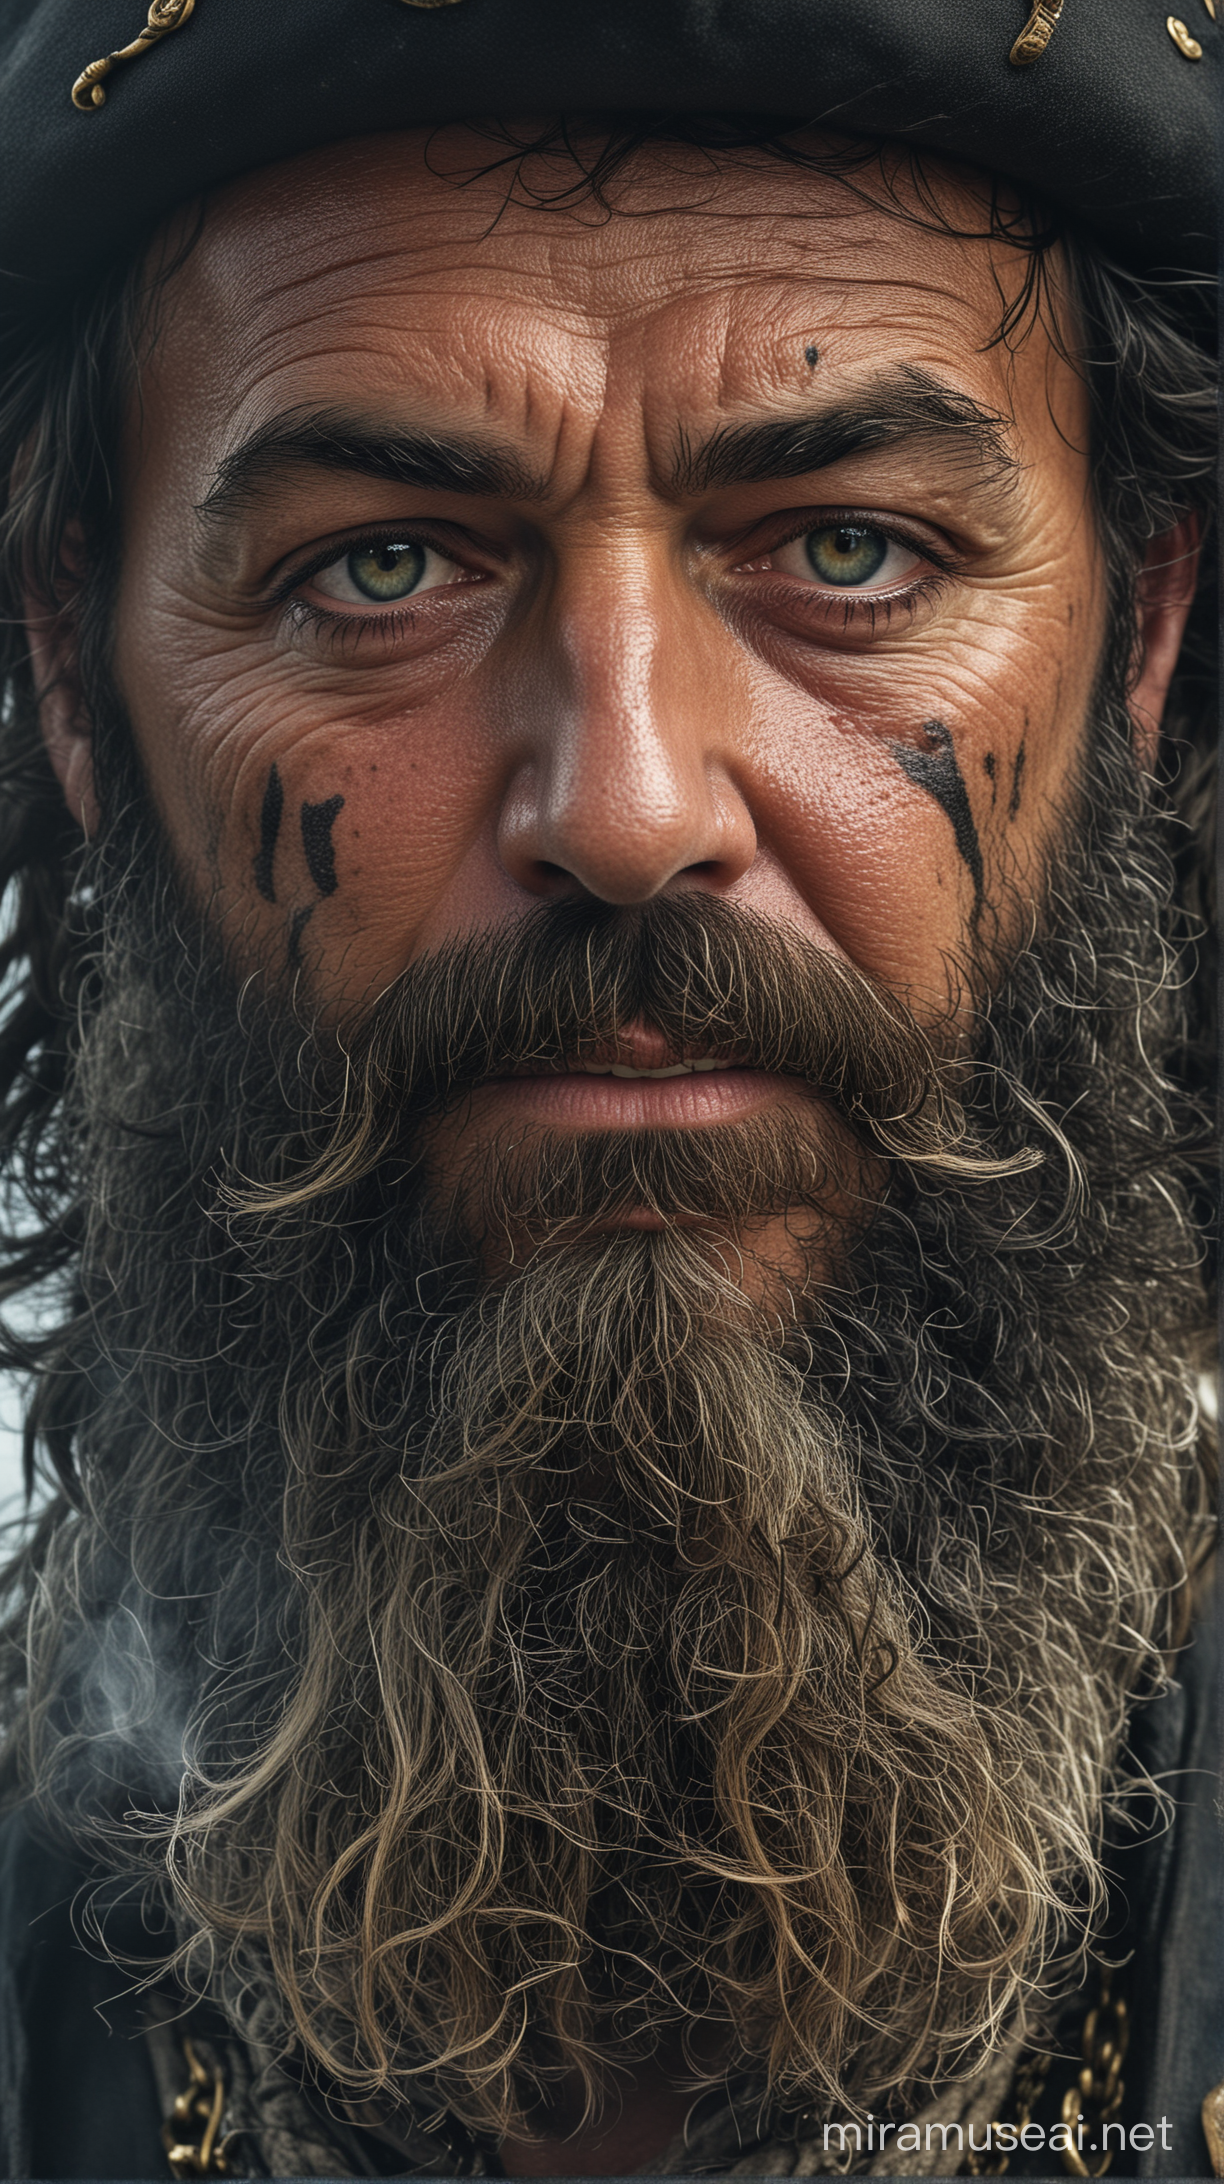 A close-up portrait of Blackbeard highlights the intricate details of his appearance. The smoke rising from his beard accentuates the rugged lines of his face. His eyes convey a sense of determination and danger that sends shivers down the spine of anyone who meets his gaze.

